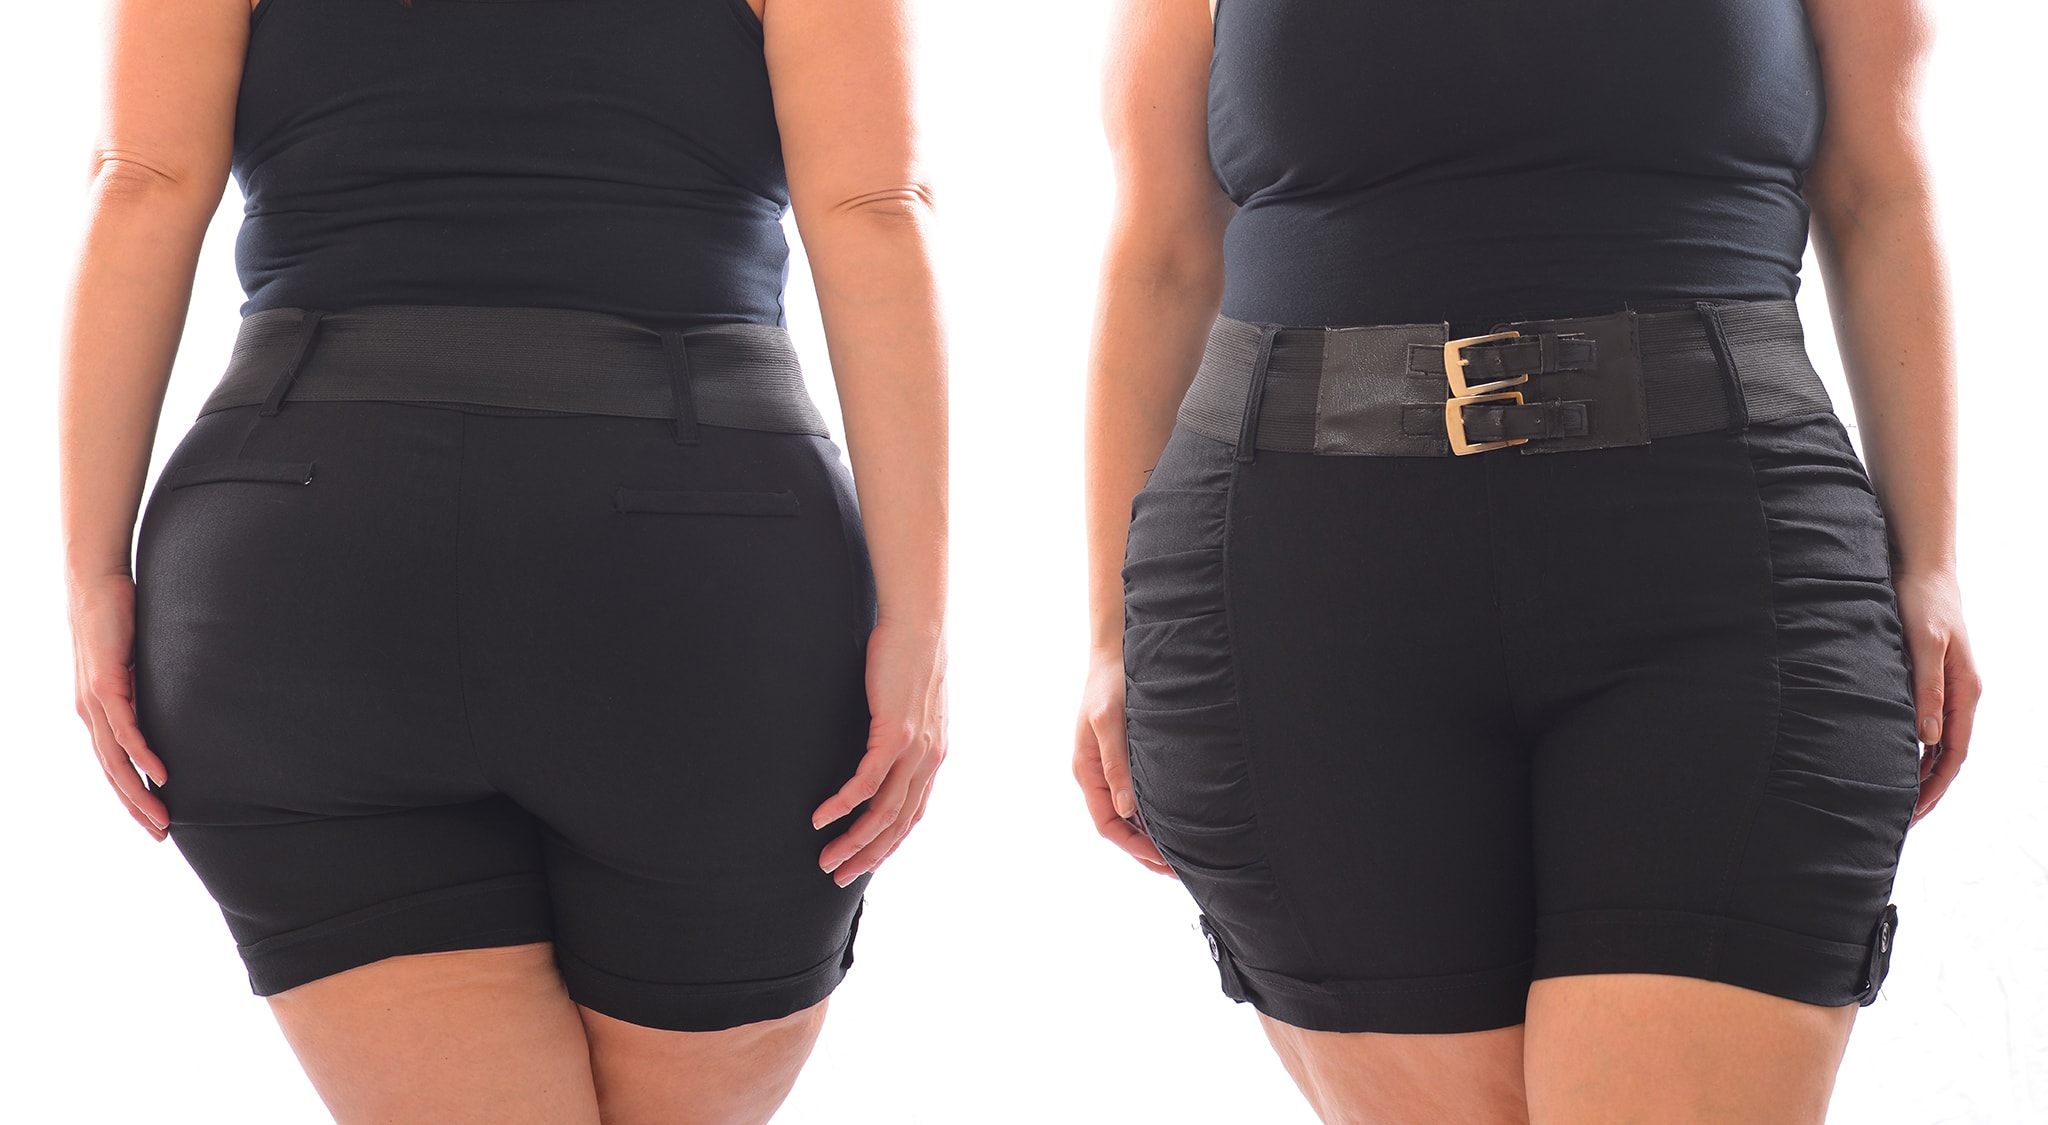 High-rise shorts with longer lengths can help accentuate a plus-size woman's curves